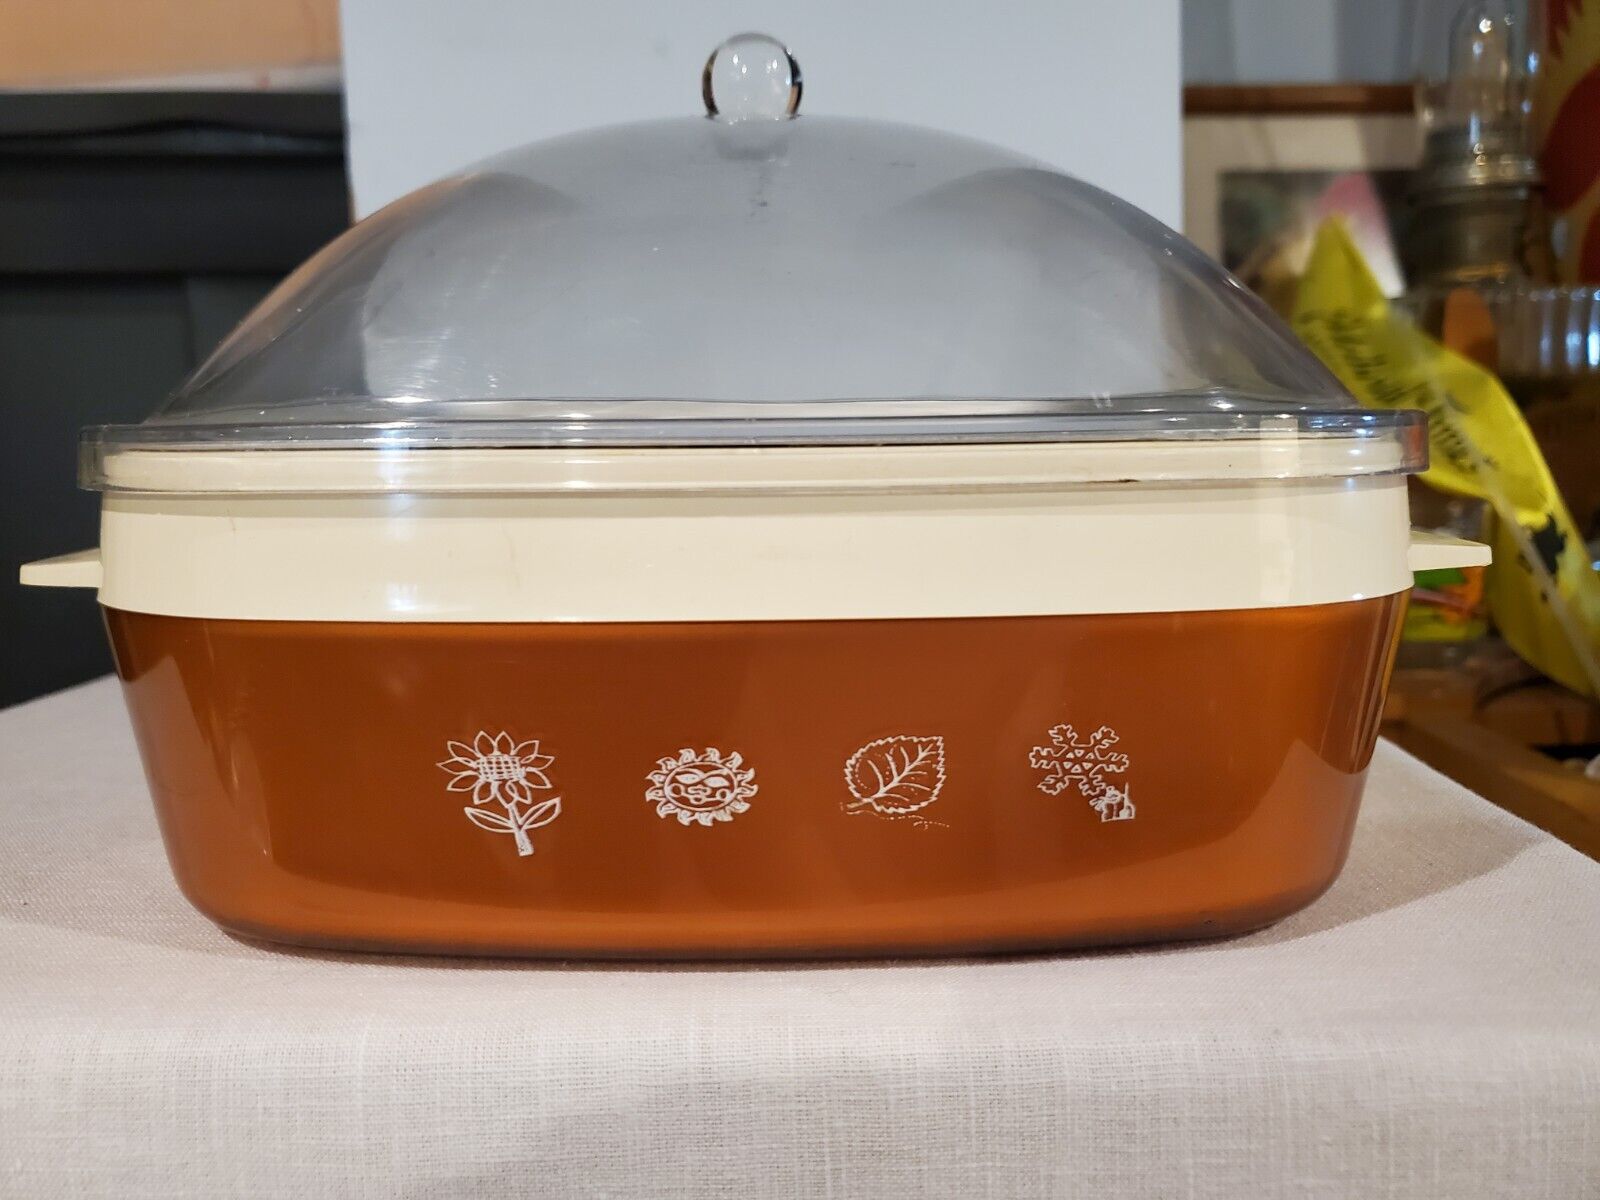 WEST BEND Thermo-Serv Insulated Serving Dish Plastic Lid Copper 60's 4 Seasona